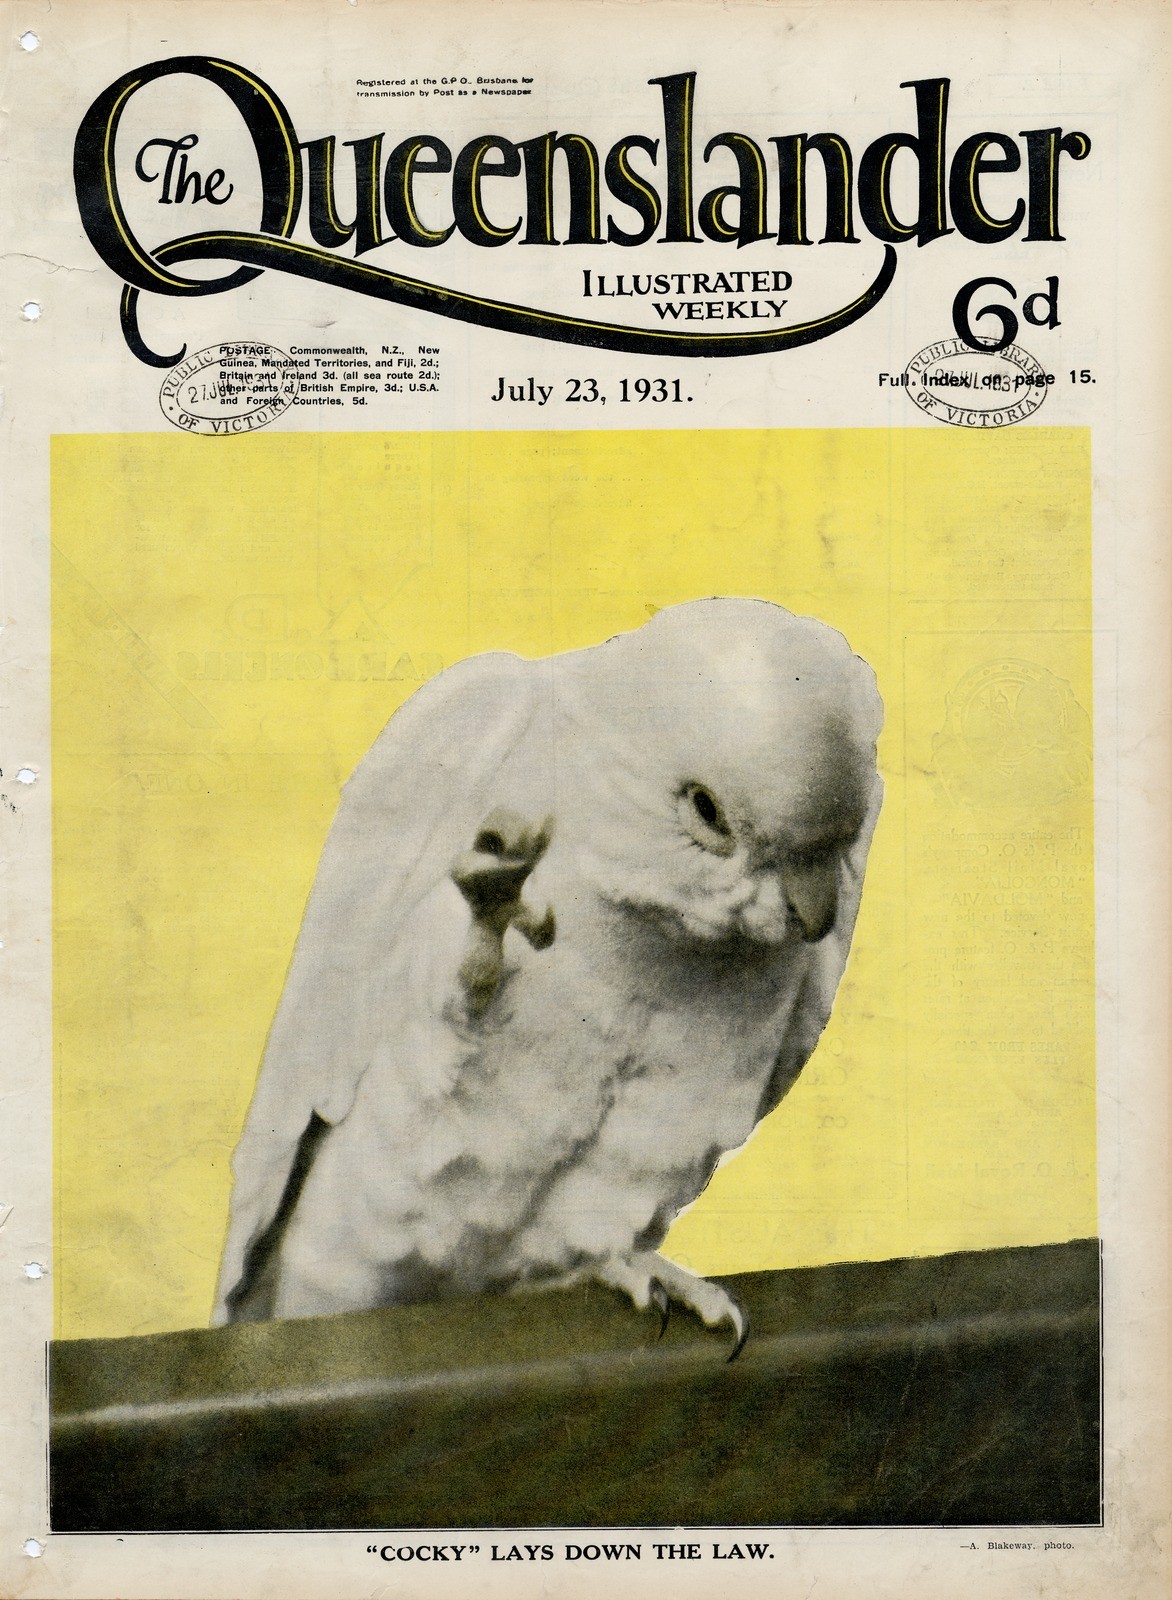 Illustrated front cover from The Queenslander July 23 1931